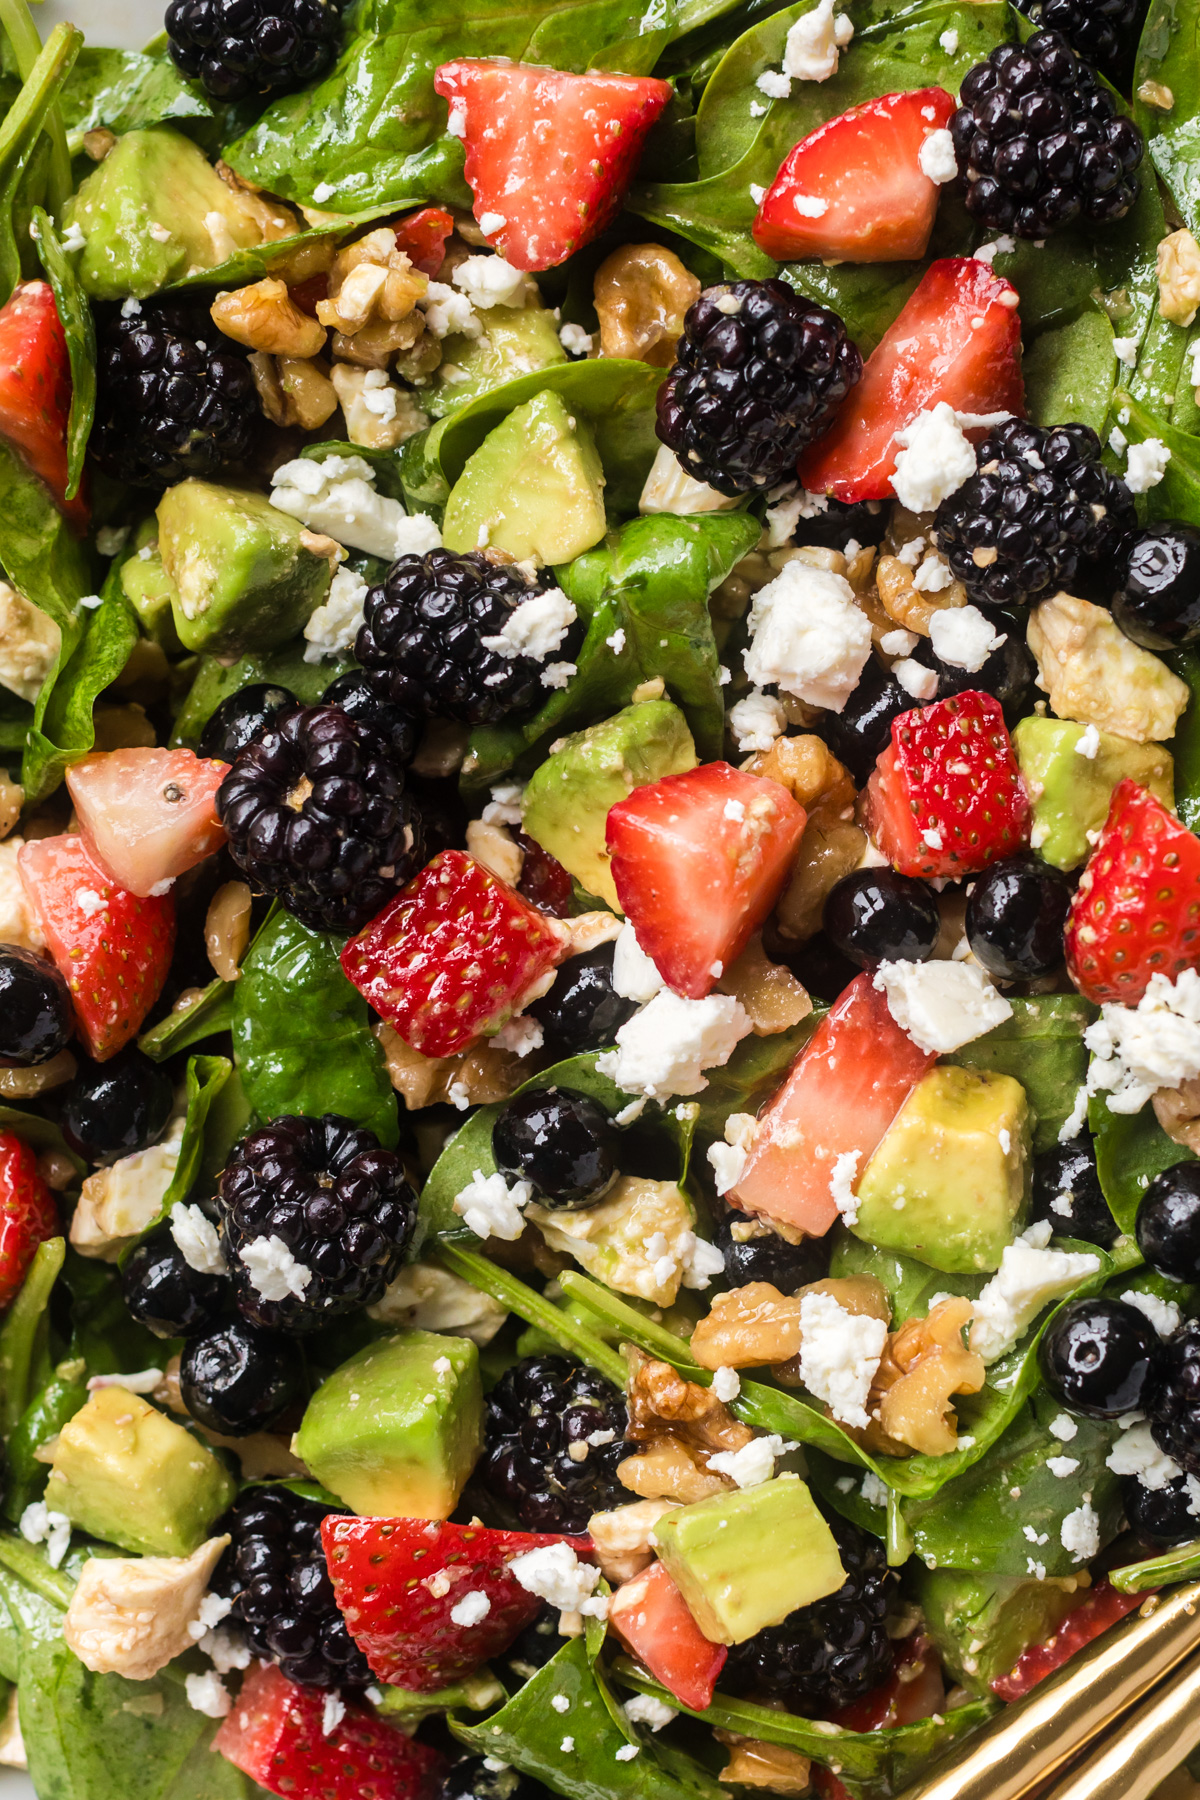 Summer berry salad with nuts.  